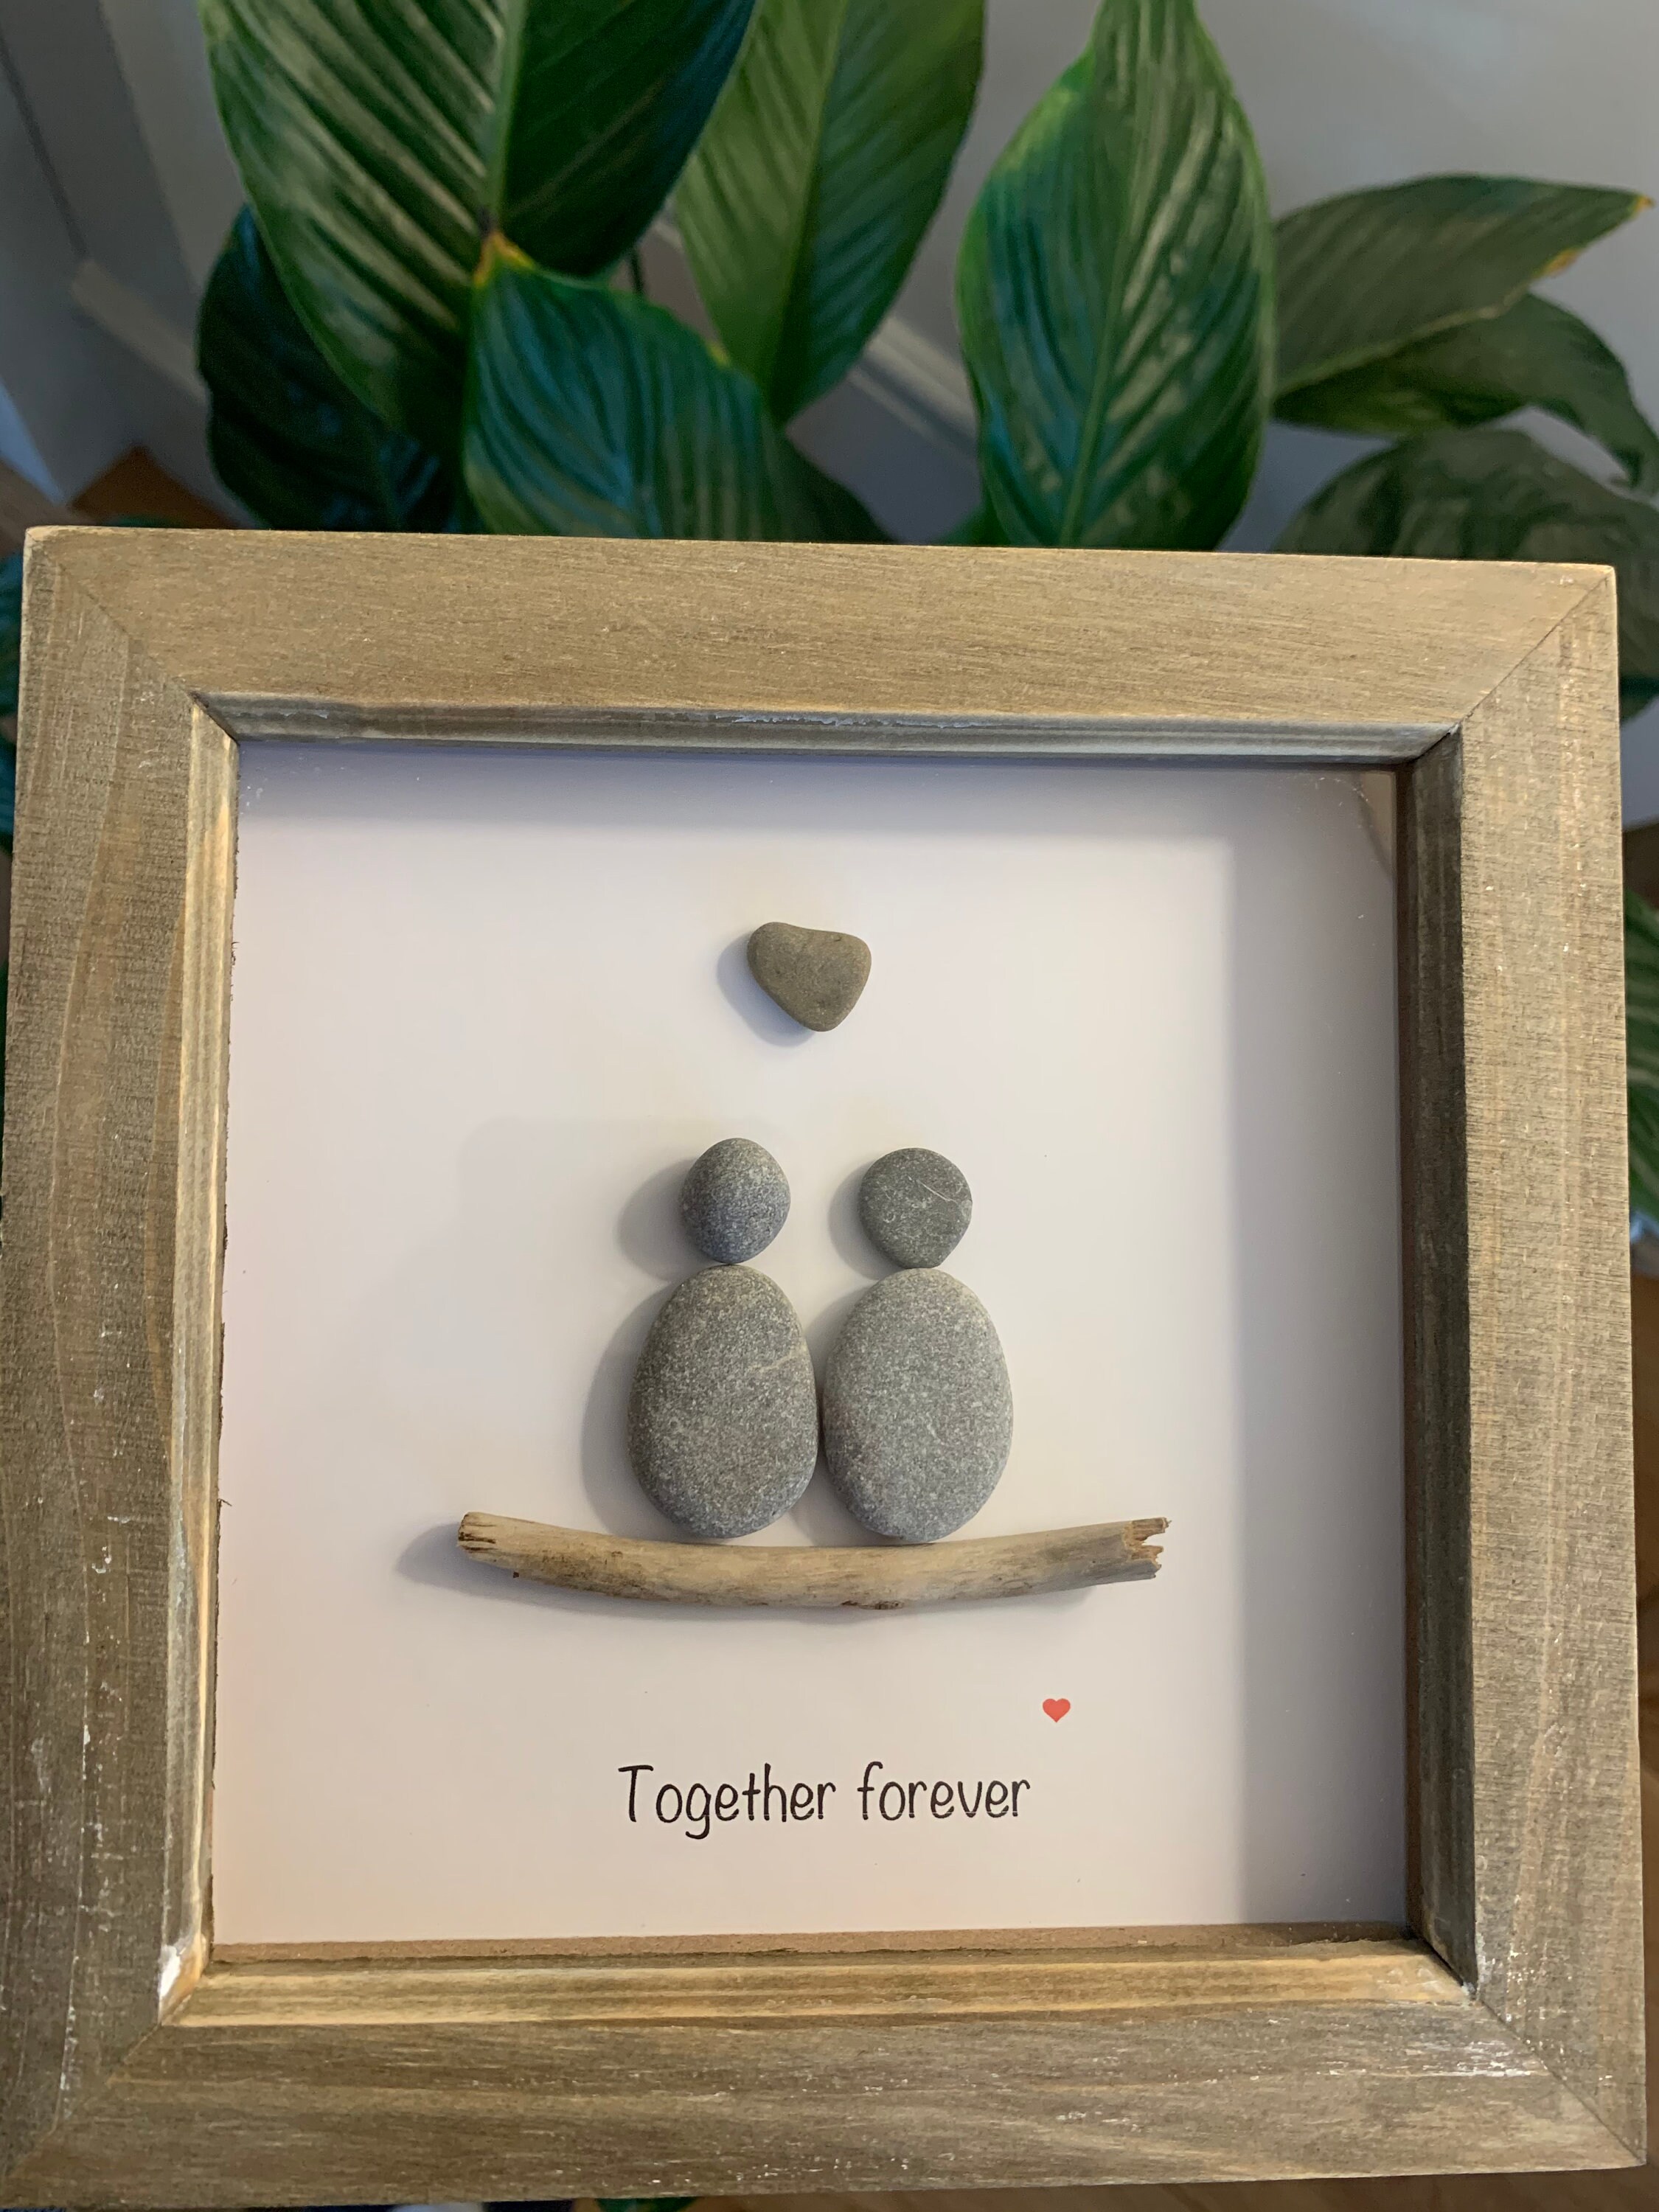 Pebble Art Frame Together Forever Wall Hangings Etsy